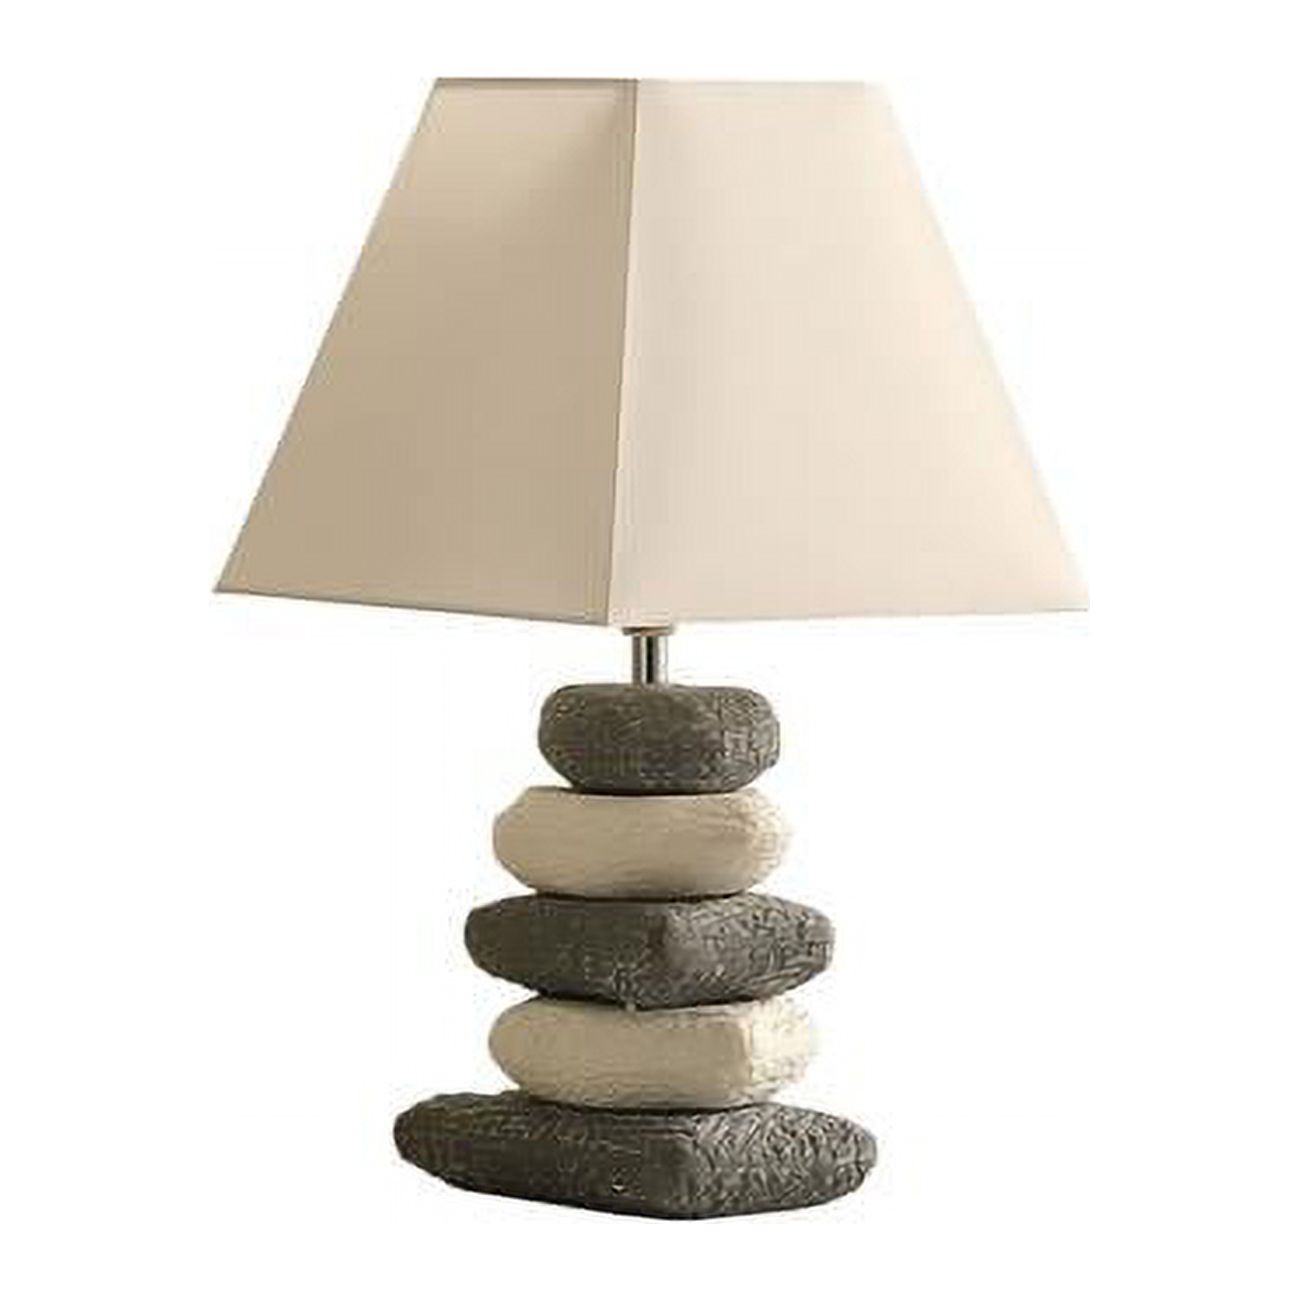 HomeRoots 468794 18 in. Organic Ceramic Pebbles Table Lamp, White & Gray - image 1 of 4